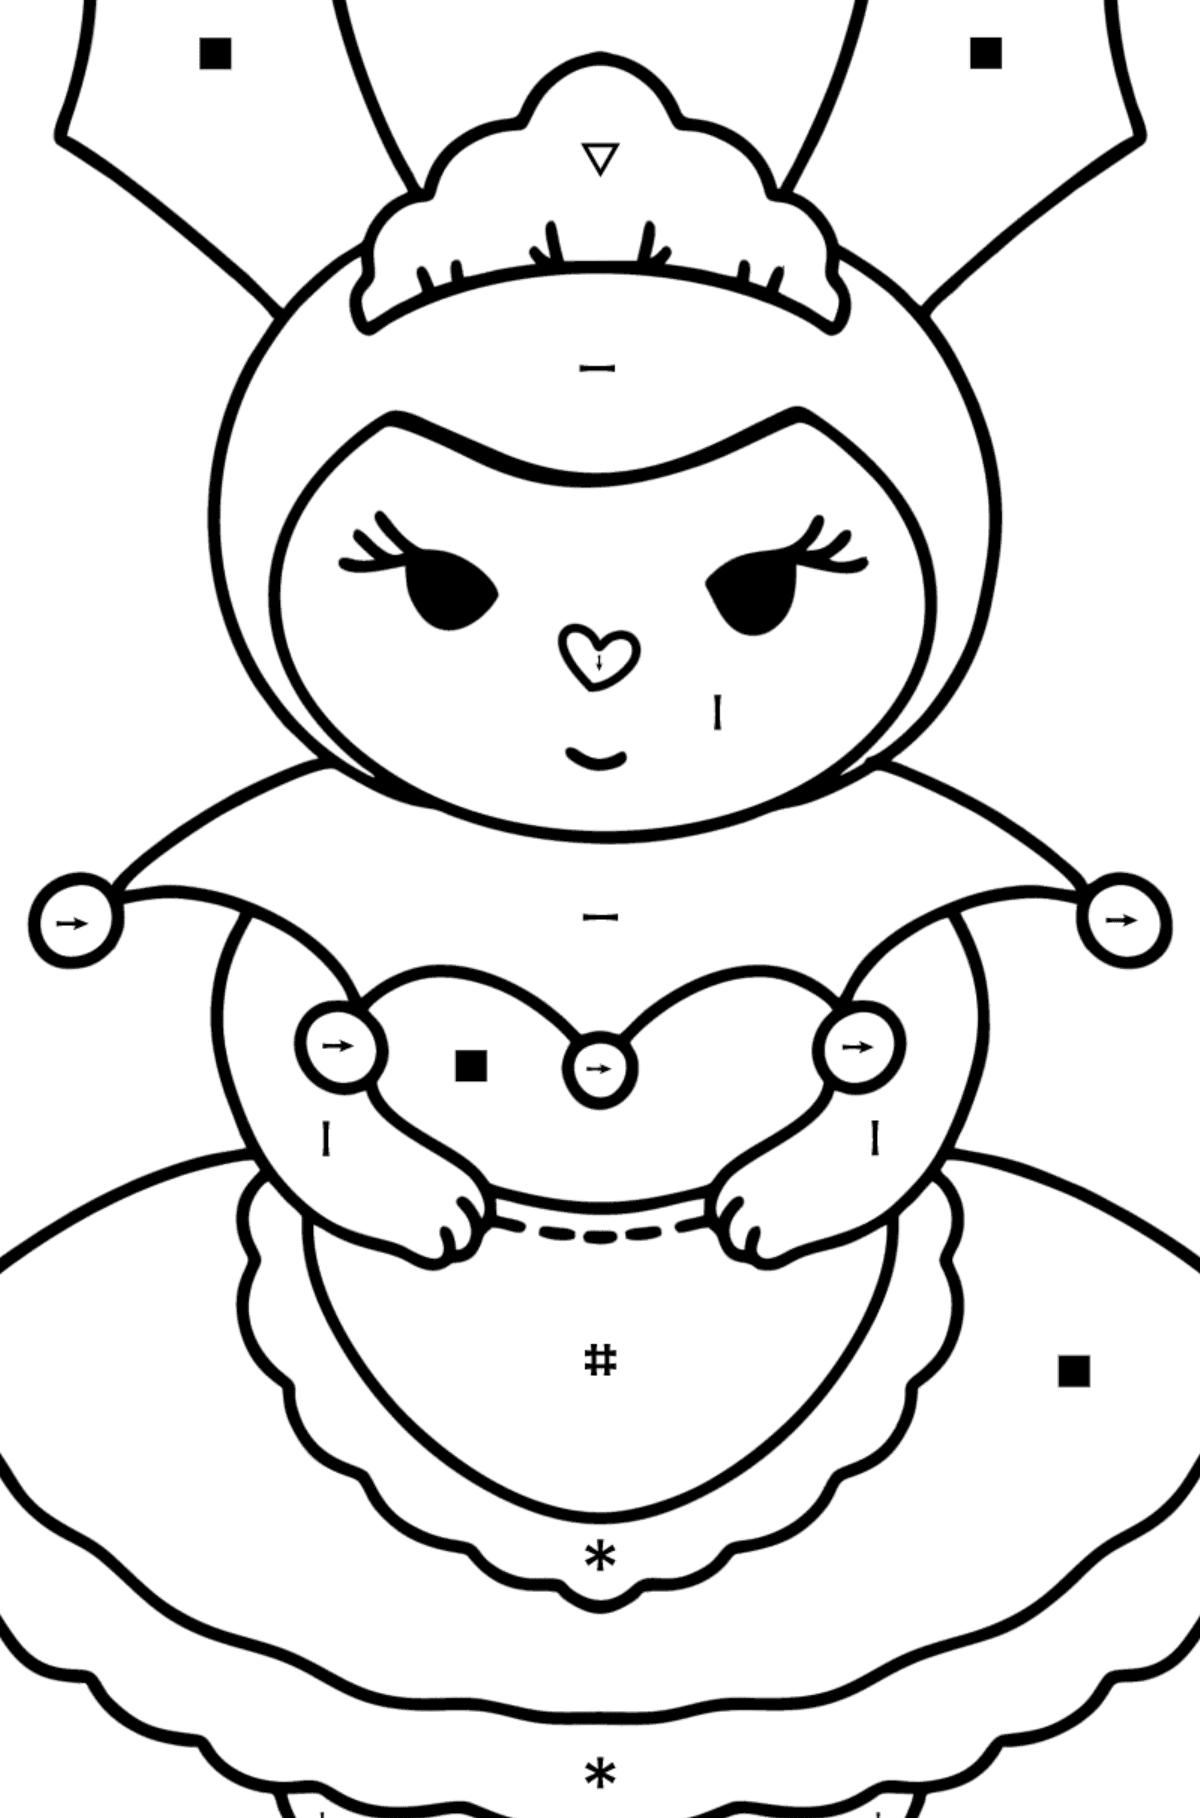 Hello Kitty Kuromy coloring page - Coloring by Symbols for Kids